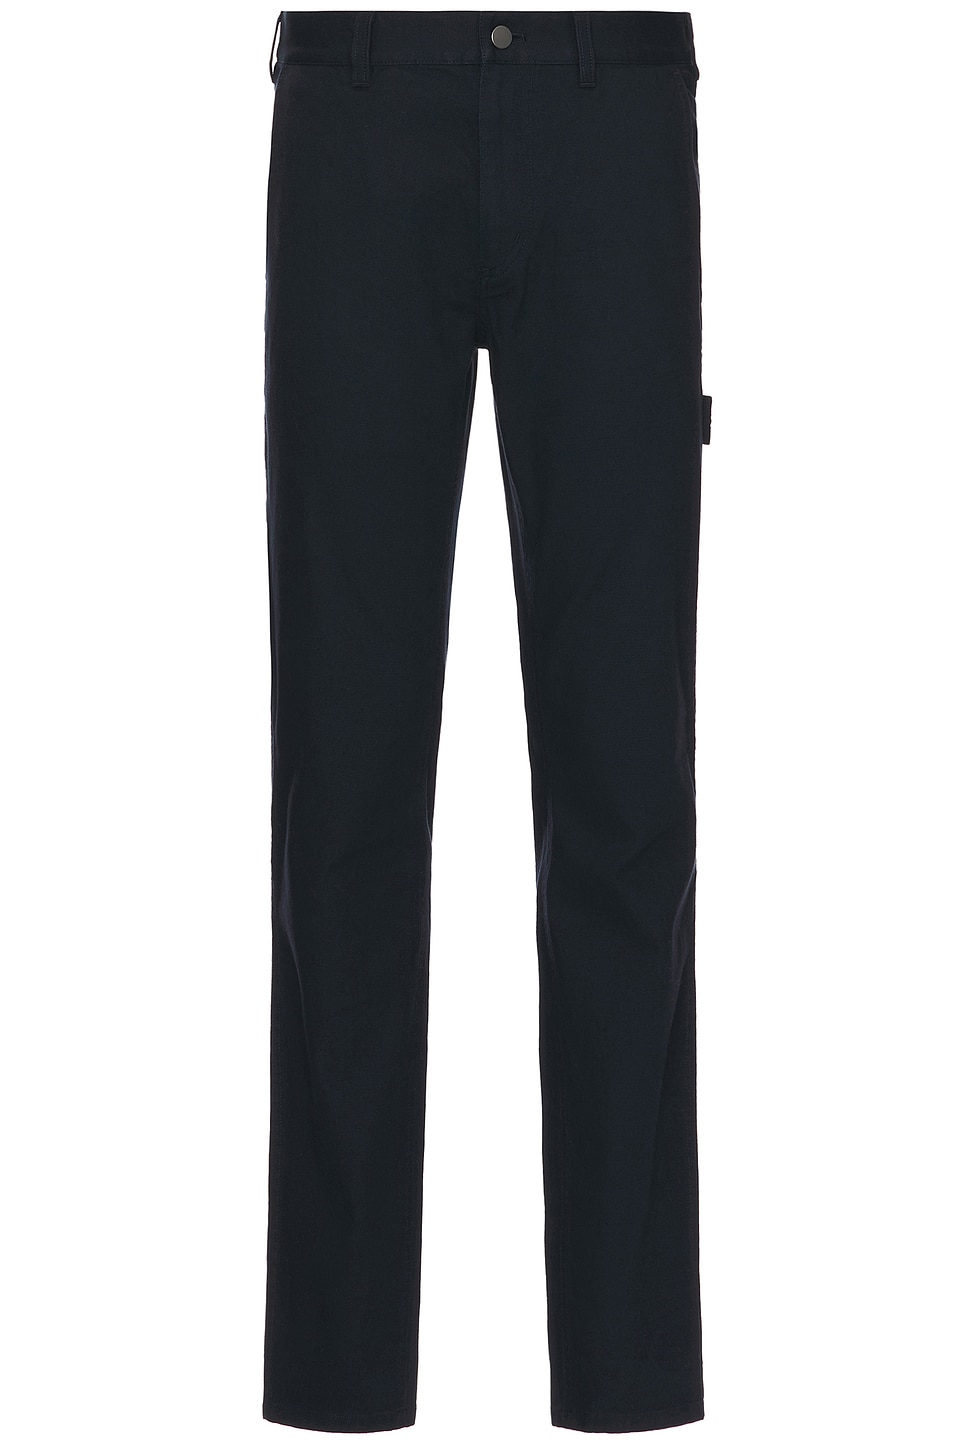 Image 1 of Theory Zaine Carpenter Pants in Baltic